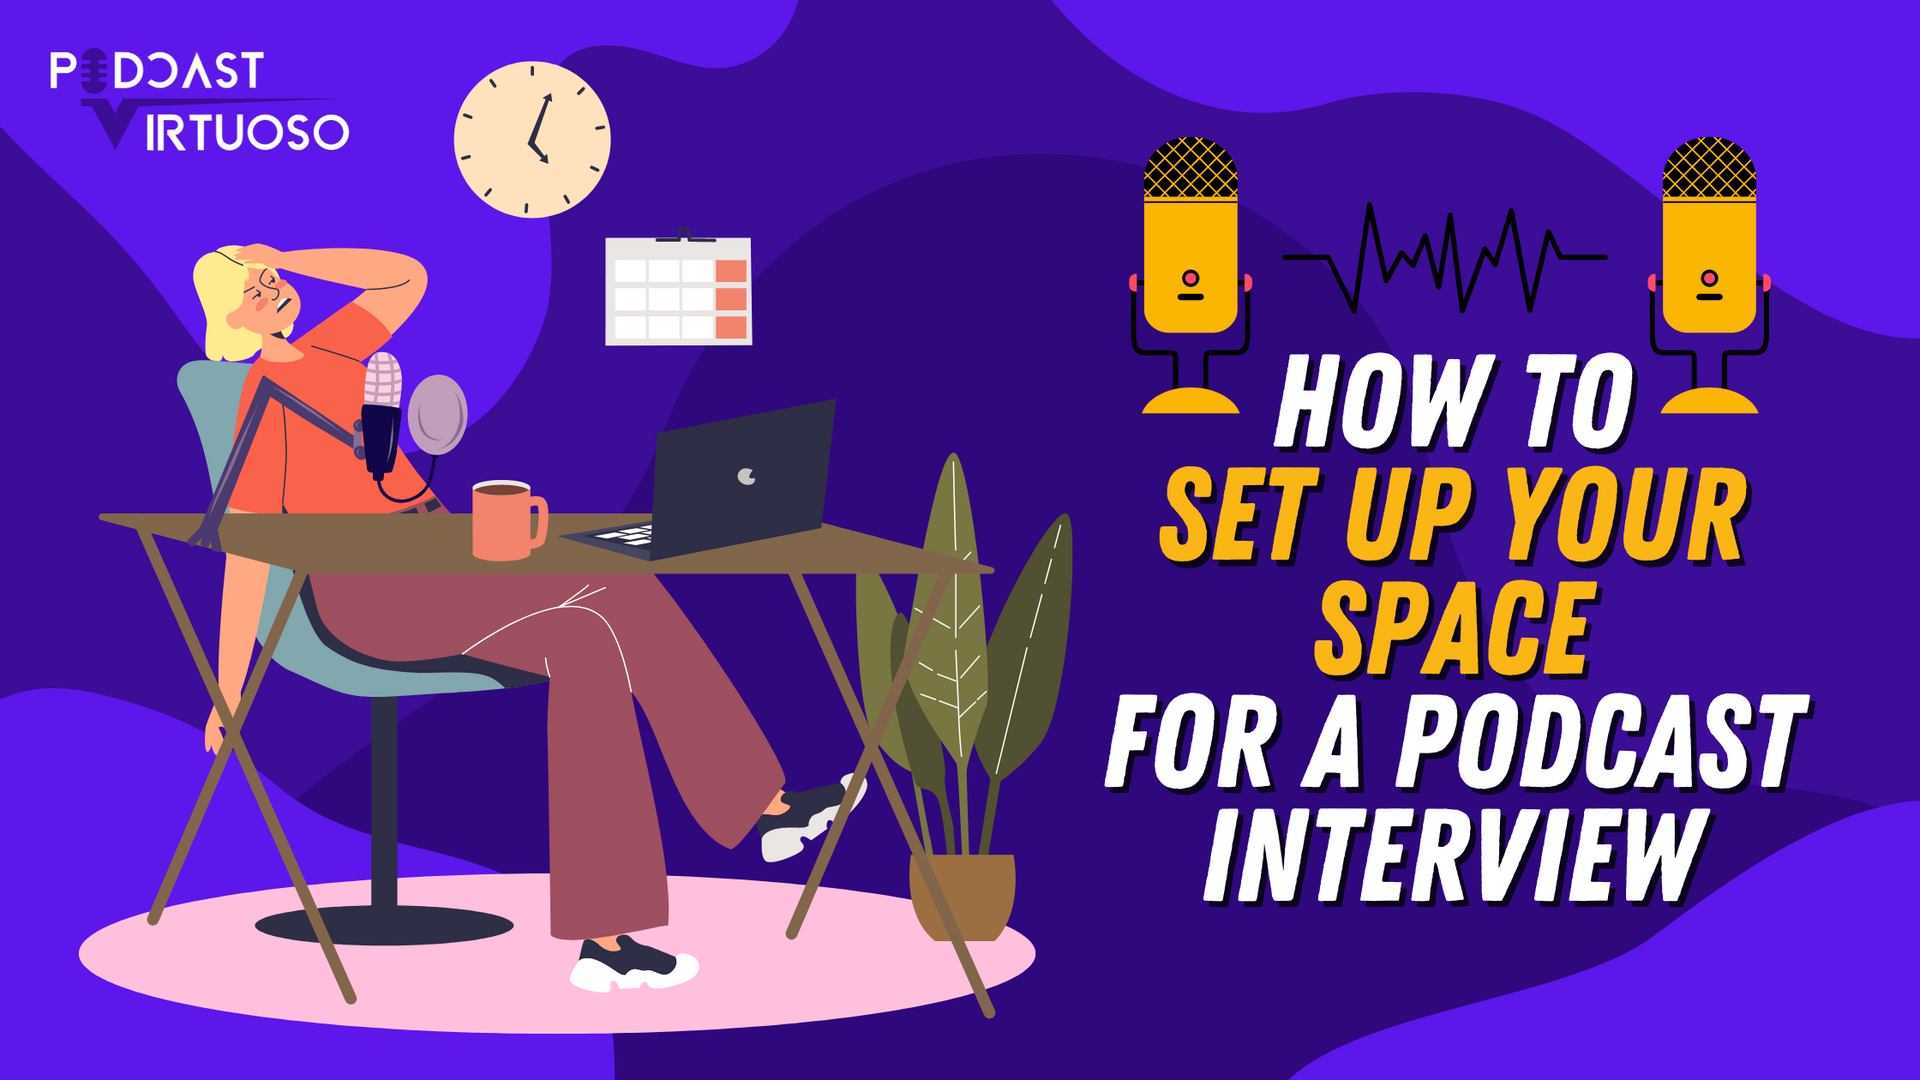 How To Set Up Your Space For A Podcast Interview by Podcast Virtuoso